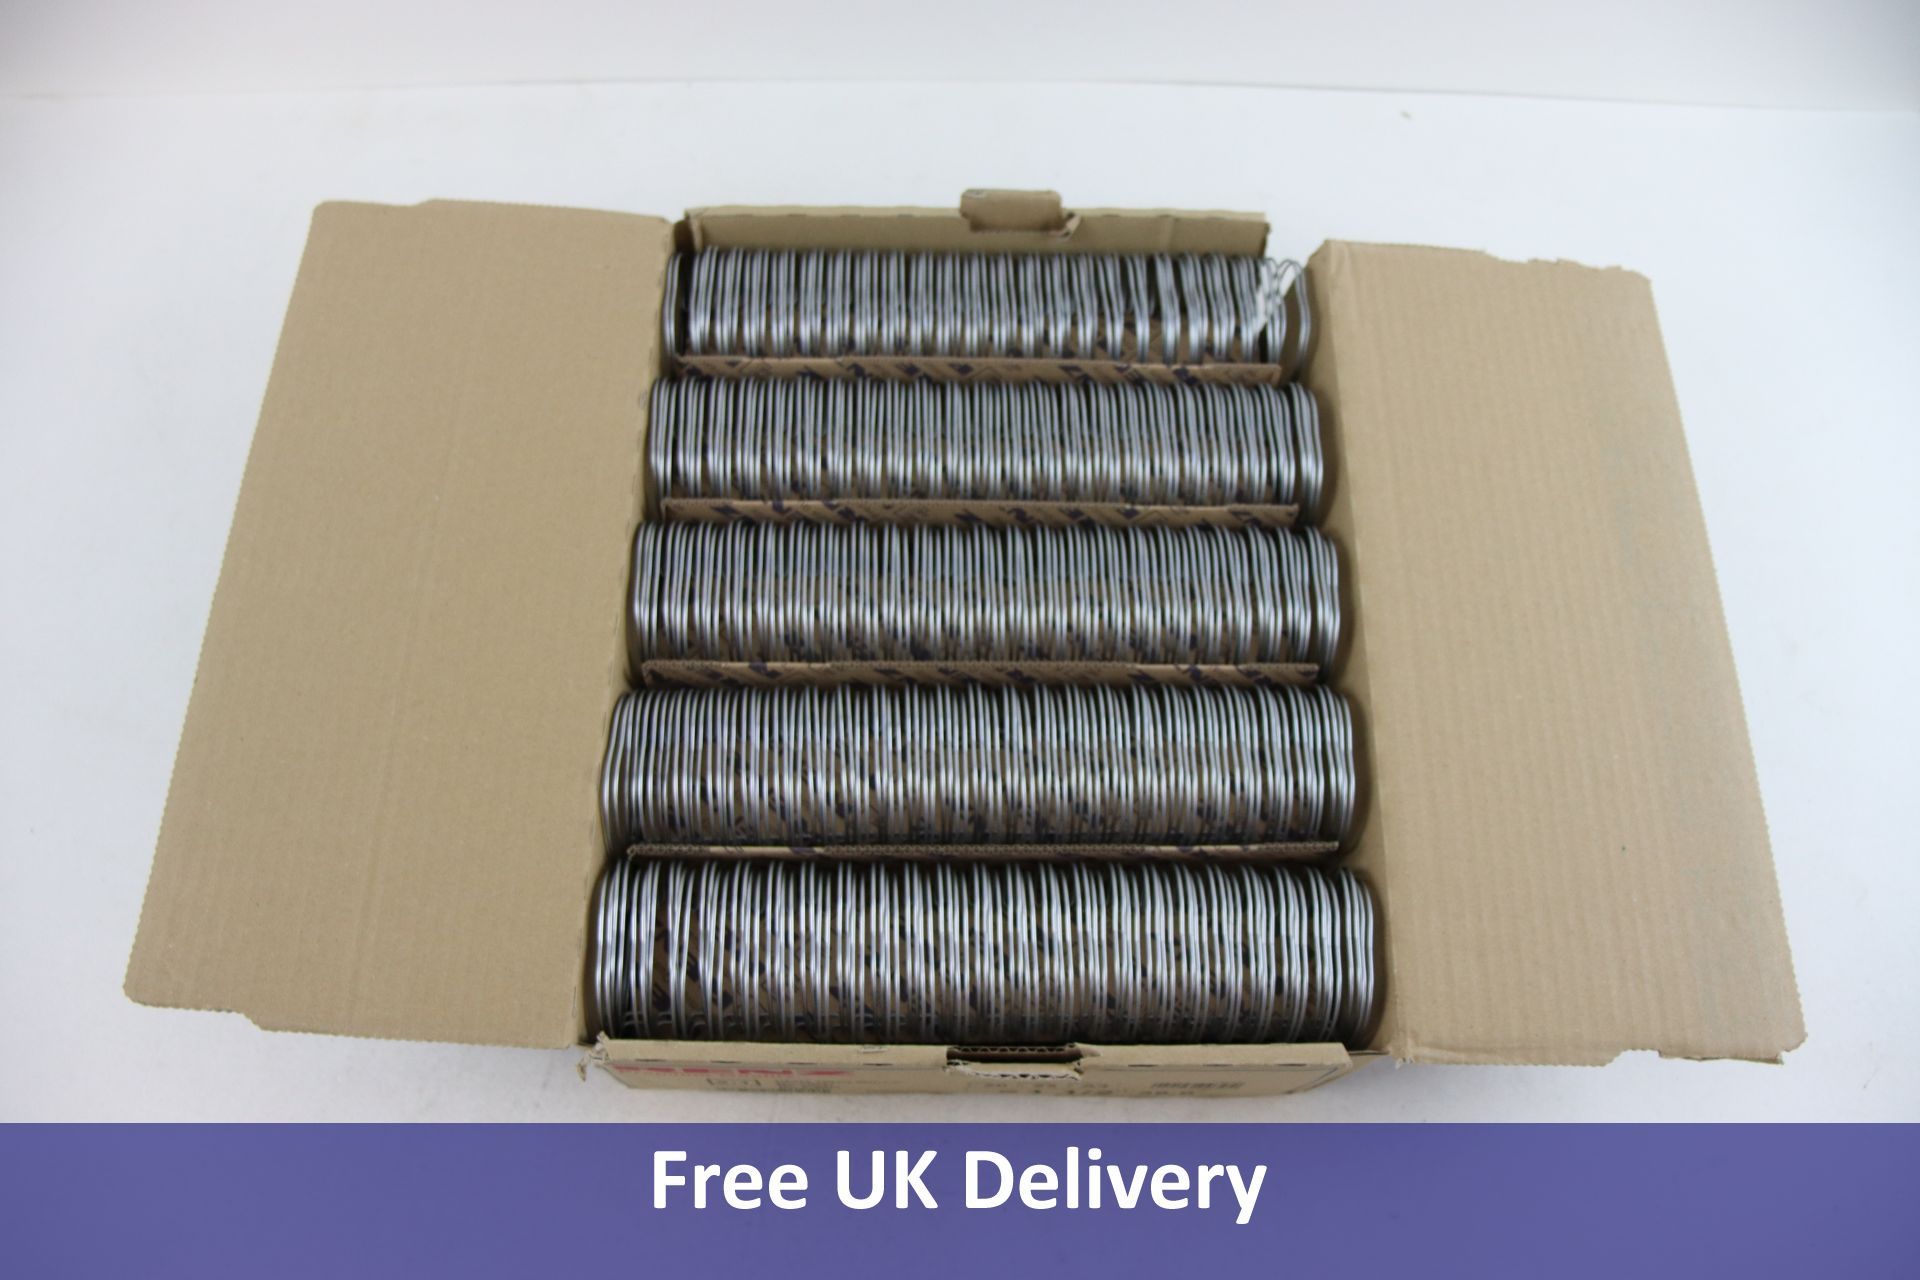 Ten Boxes Of Renz Ring Wire Each Box Contains 20 Pieces Each Has 23 Loops And Is For A4 Format